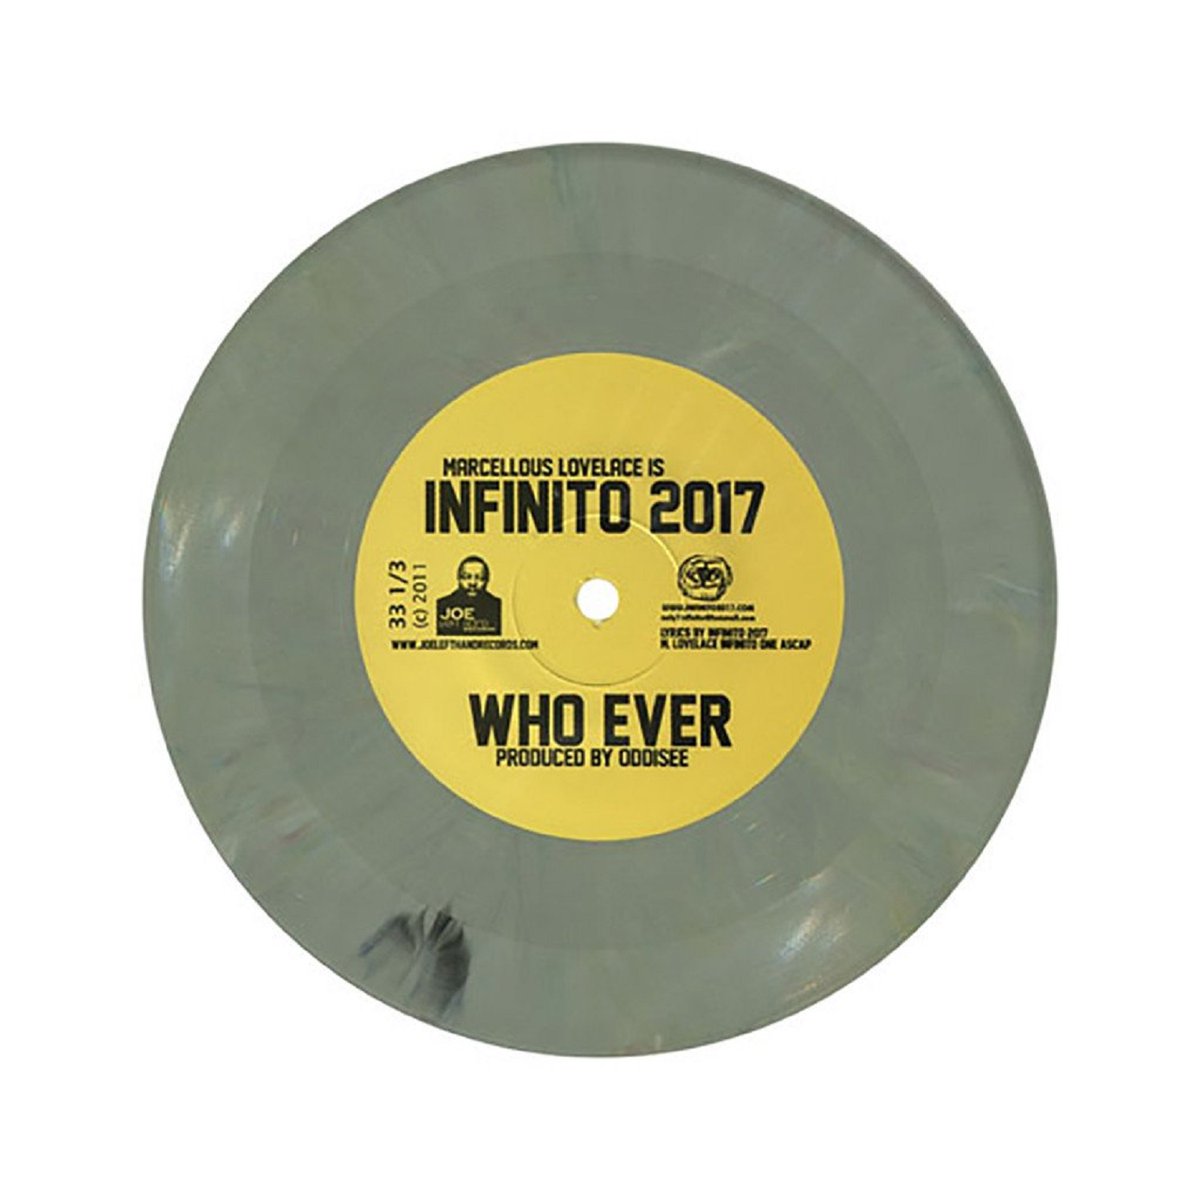 Limited Infinito 2017 -WhoEver 7inch 
#vinyl #limited #fatbeats #chicago #infinito2017 @joeleftpromo